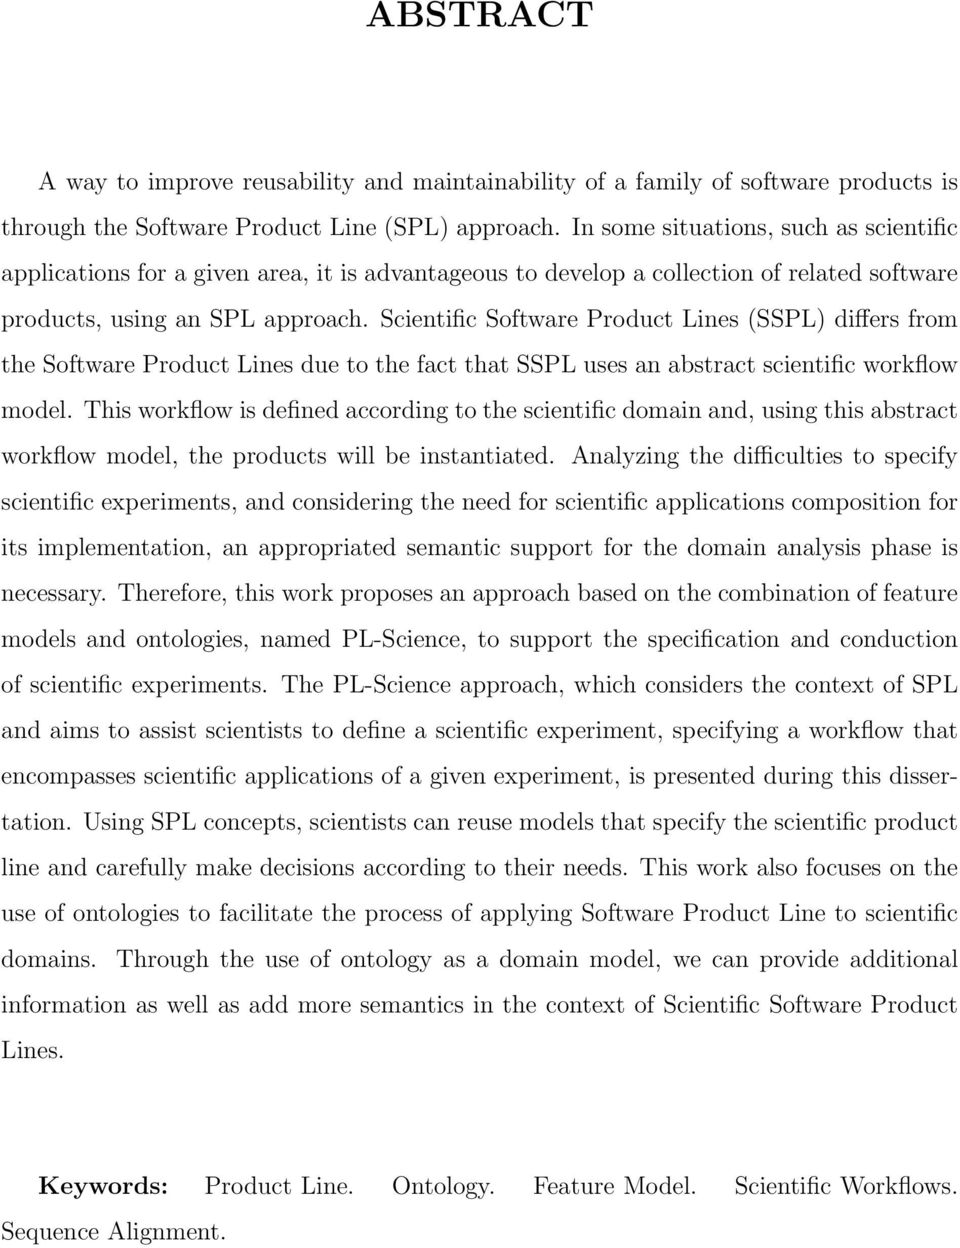 Scientific Software Product Lines (SSPL) differs from the Software Product Lines due to the fact that SSPL uses an abstract scientific workflow model.